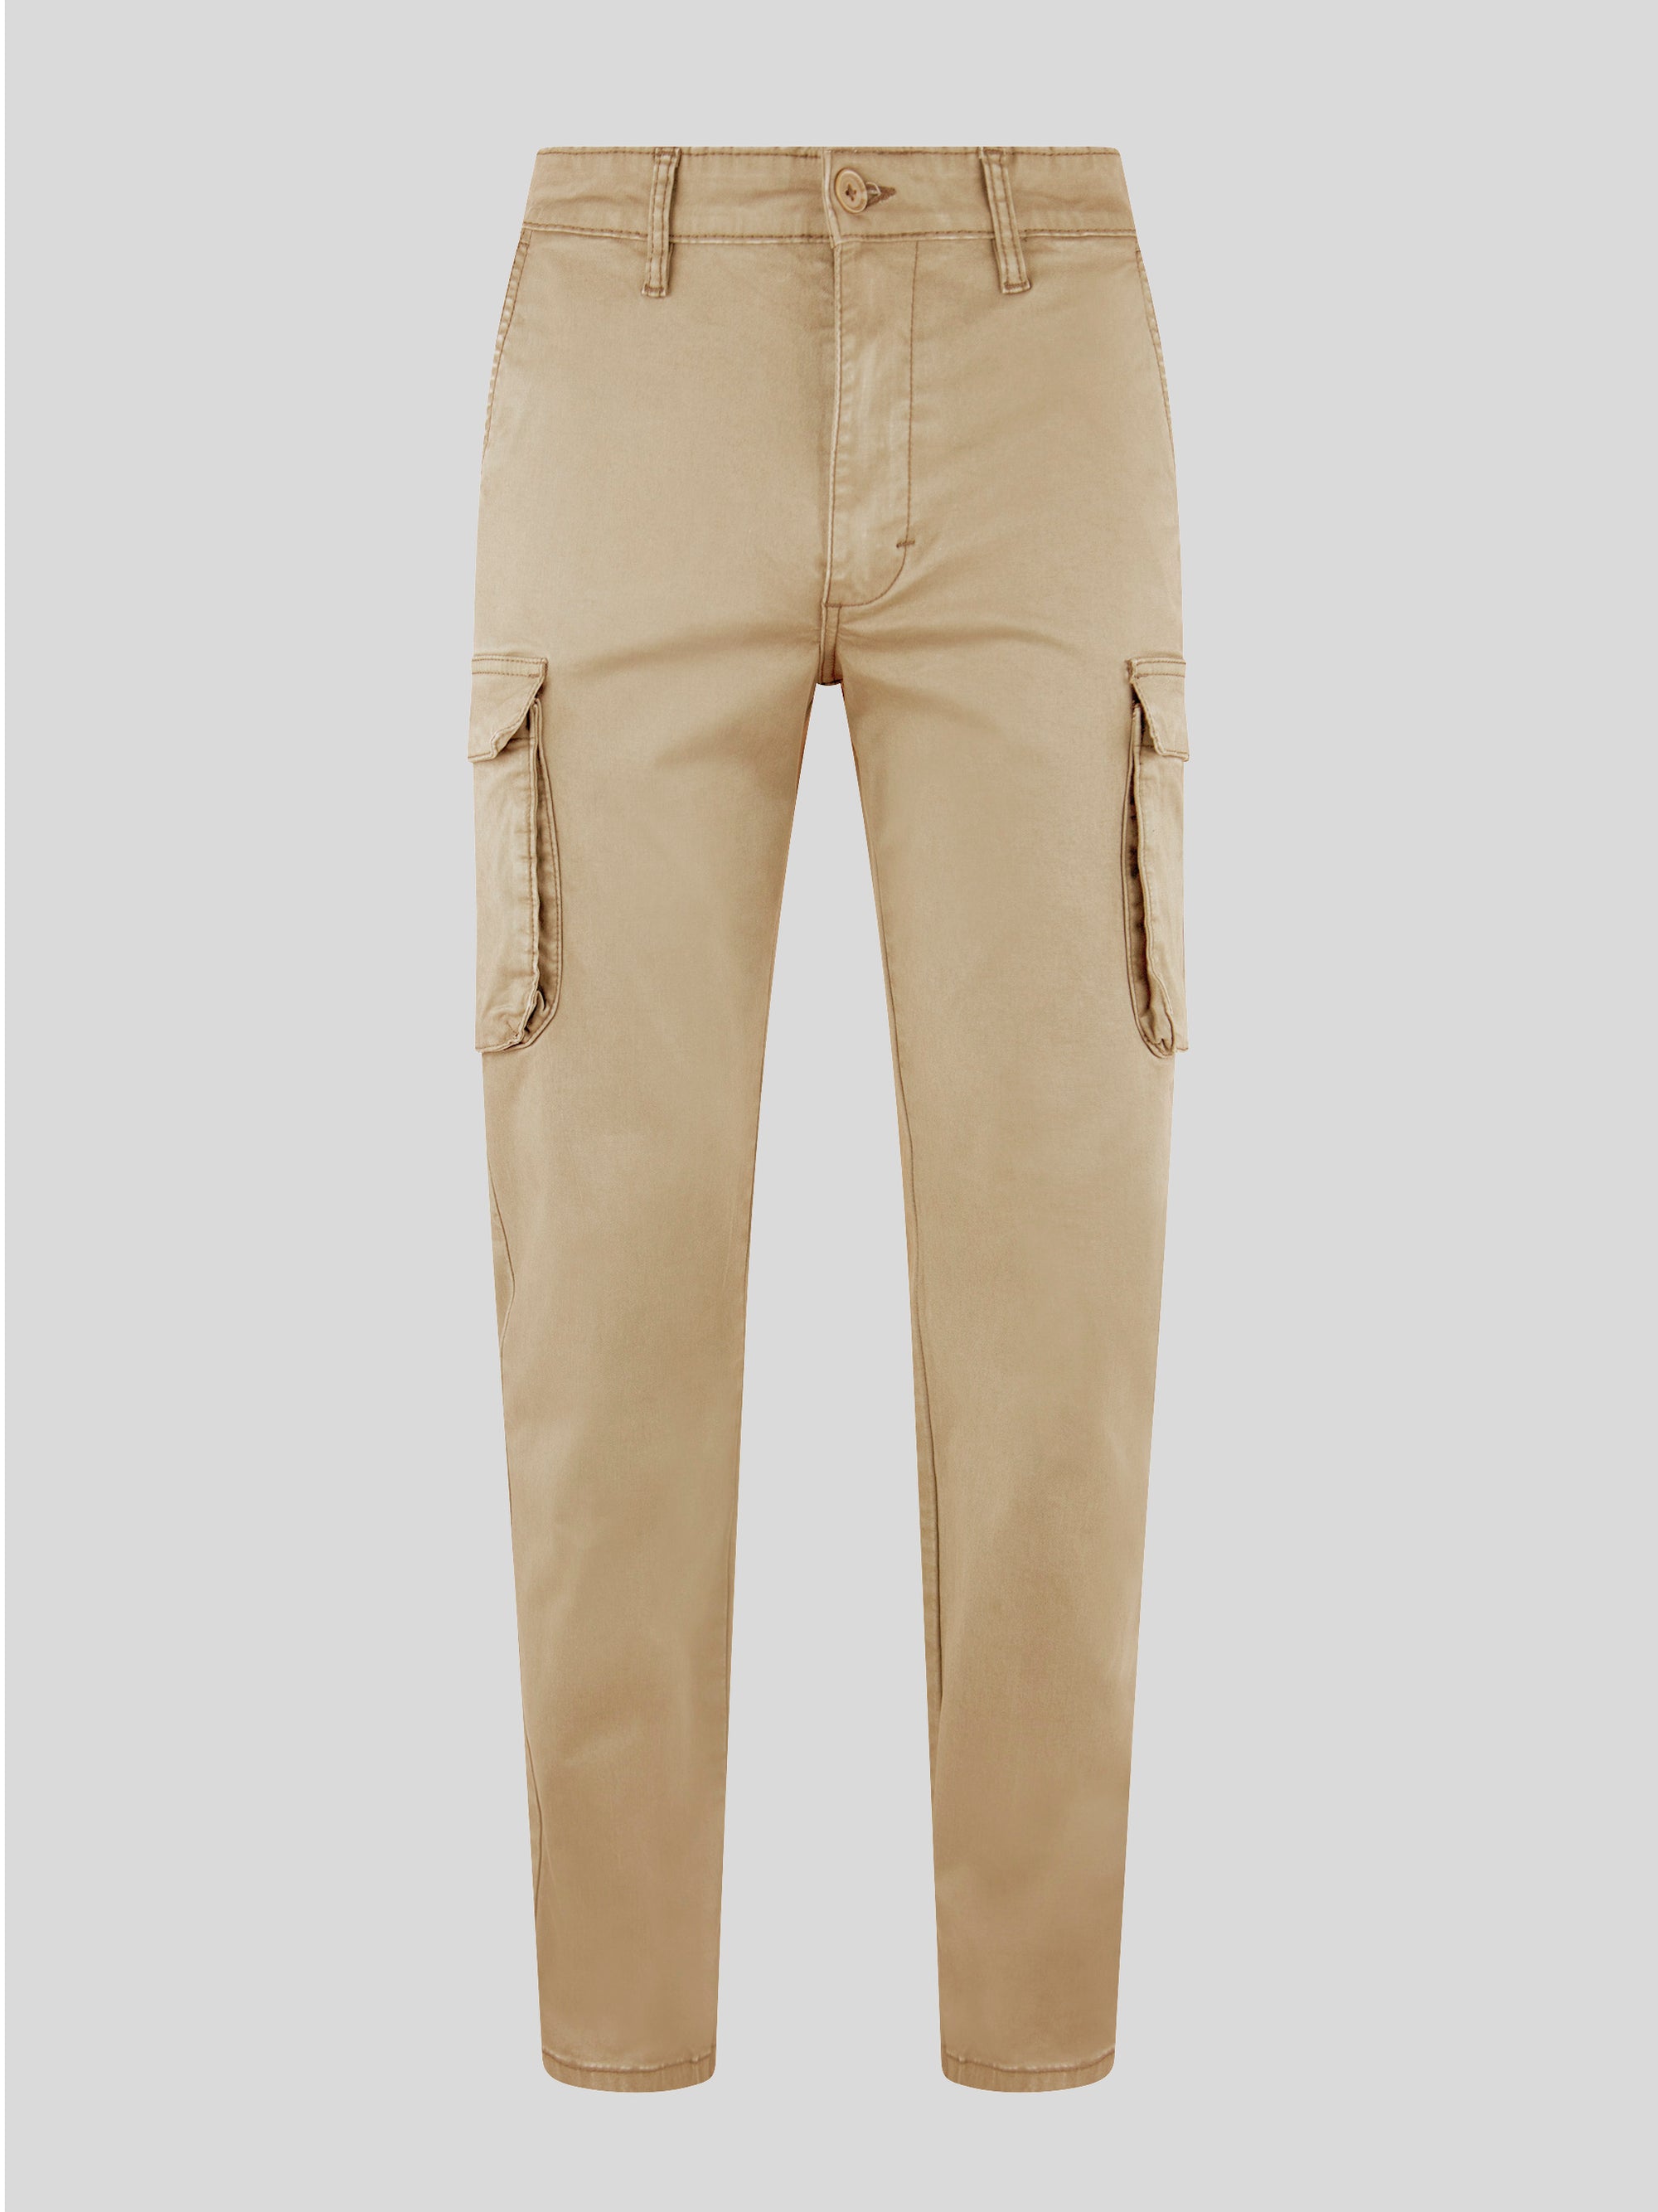 Tapered Fit Tiden Stone Cargo Pant